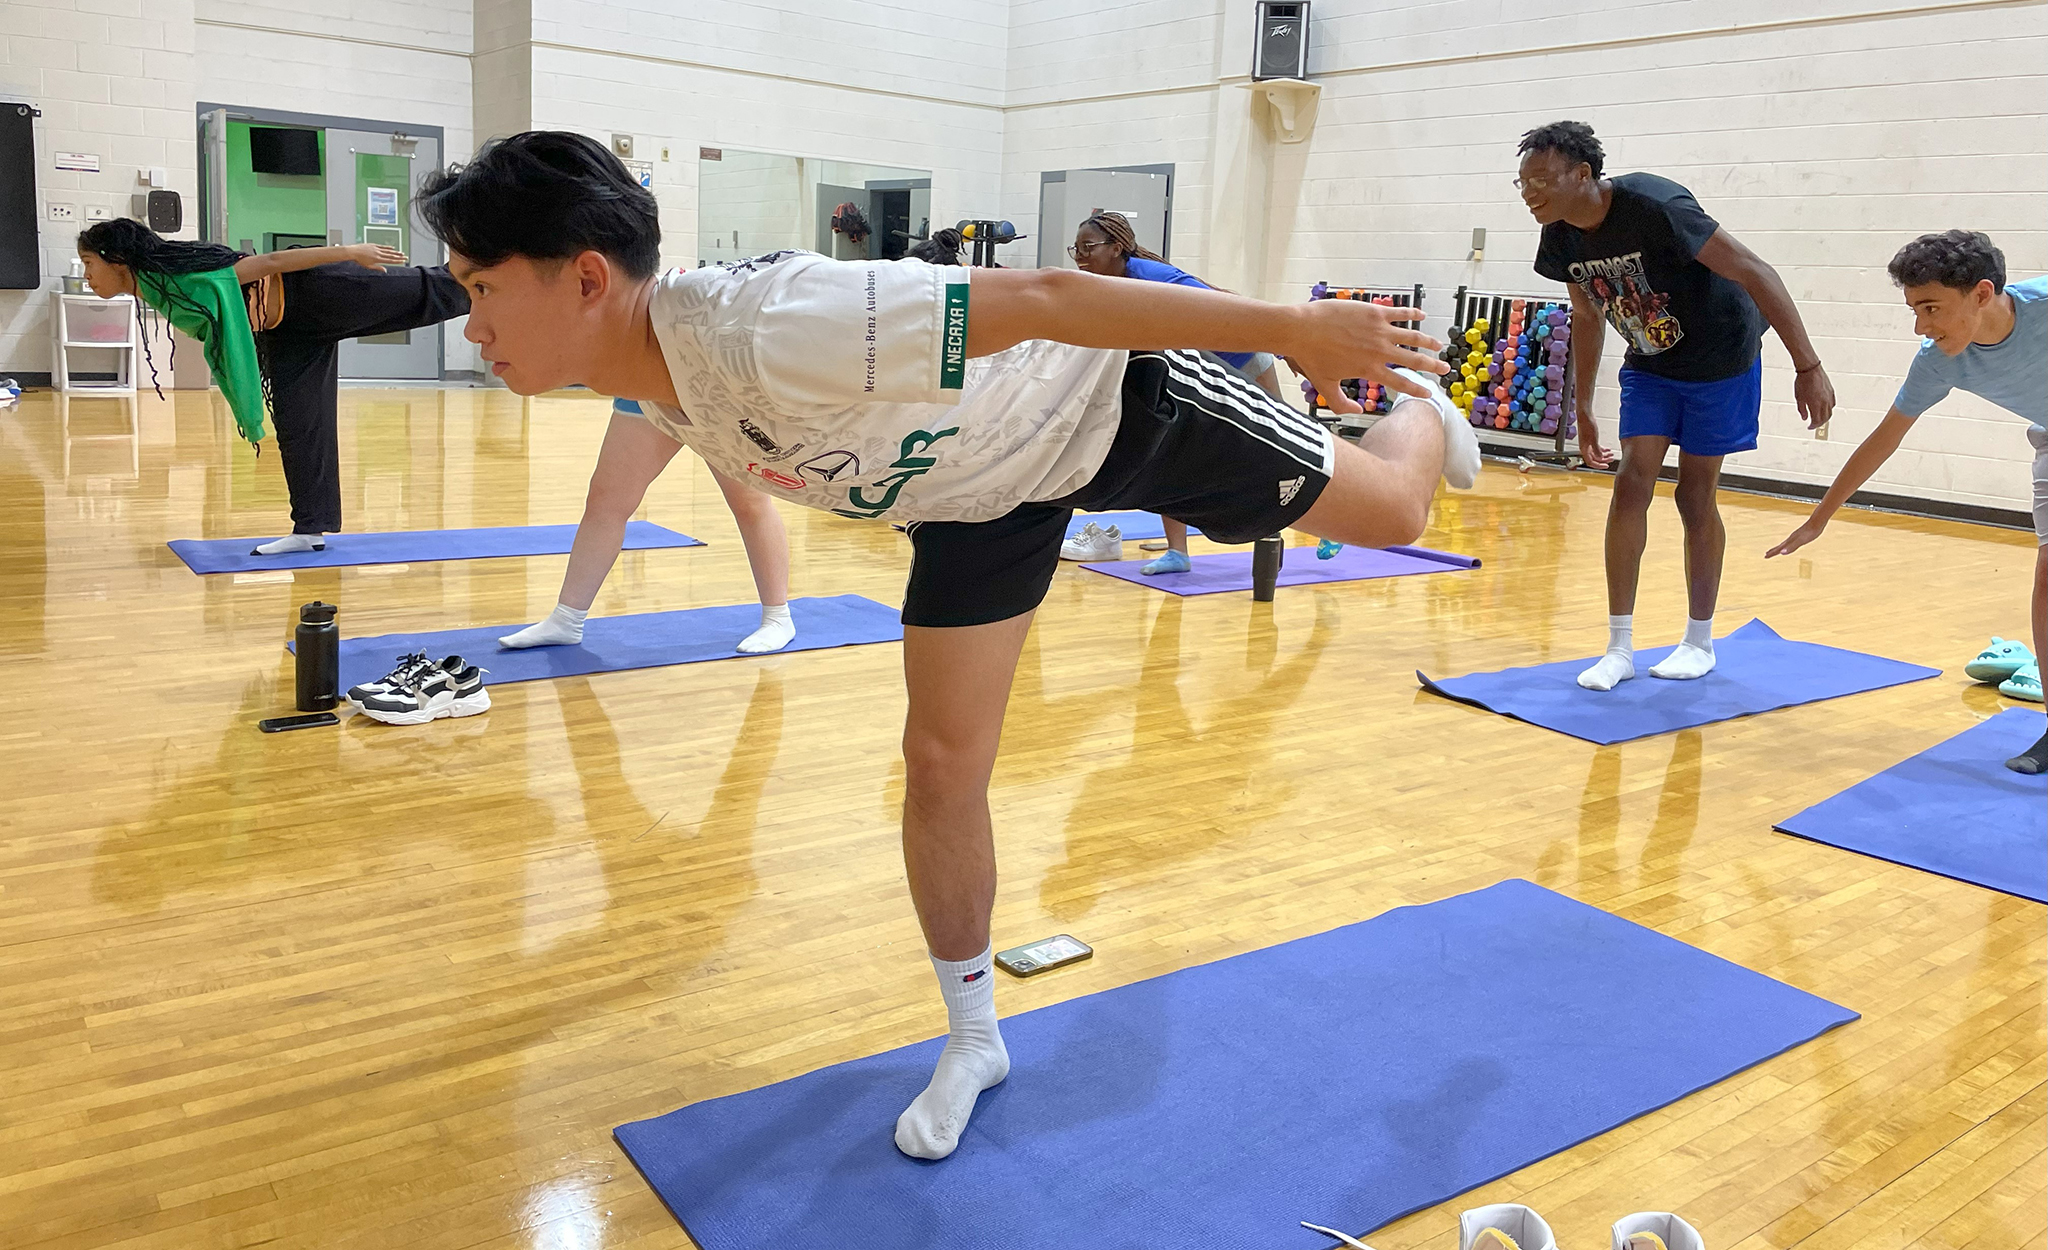 Rising high school juniors and seniors from across the country participate in yoga during an after-class activity during the university’s second annual Summer Language Institute. The monthlong institute provides high-level Chinese language-learning for high school students. Submitted photo